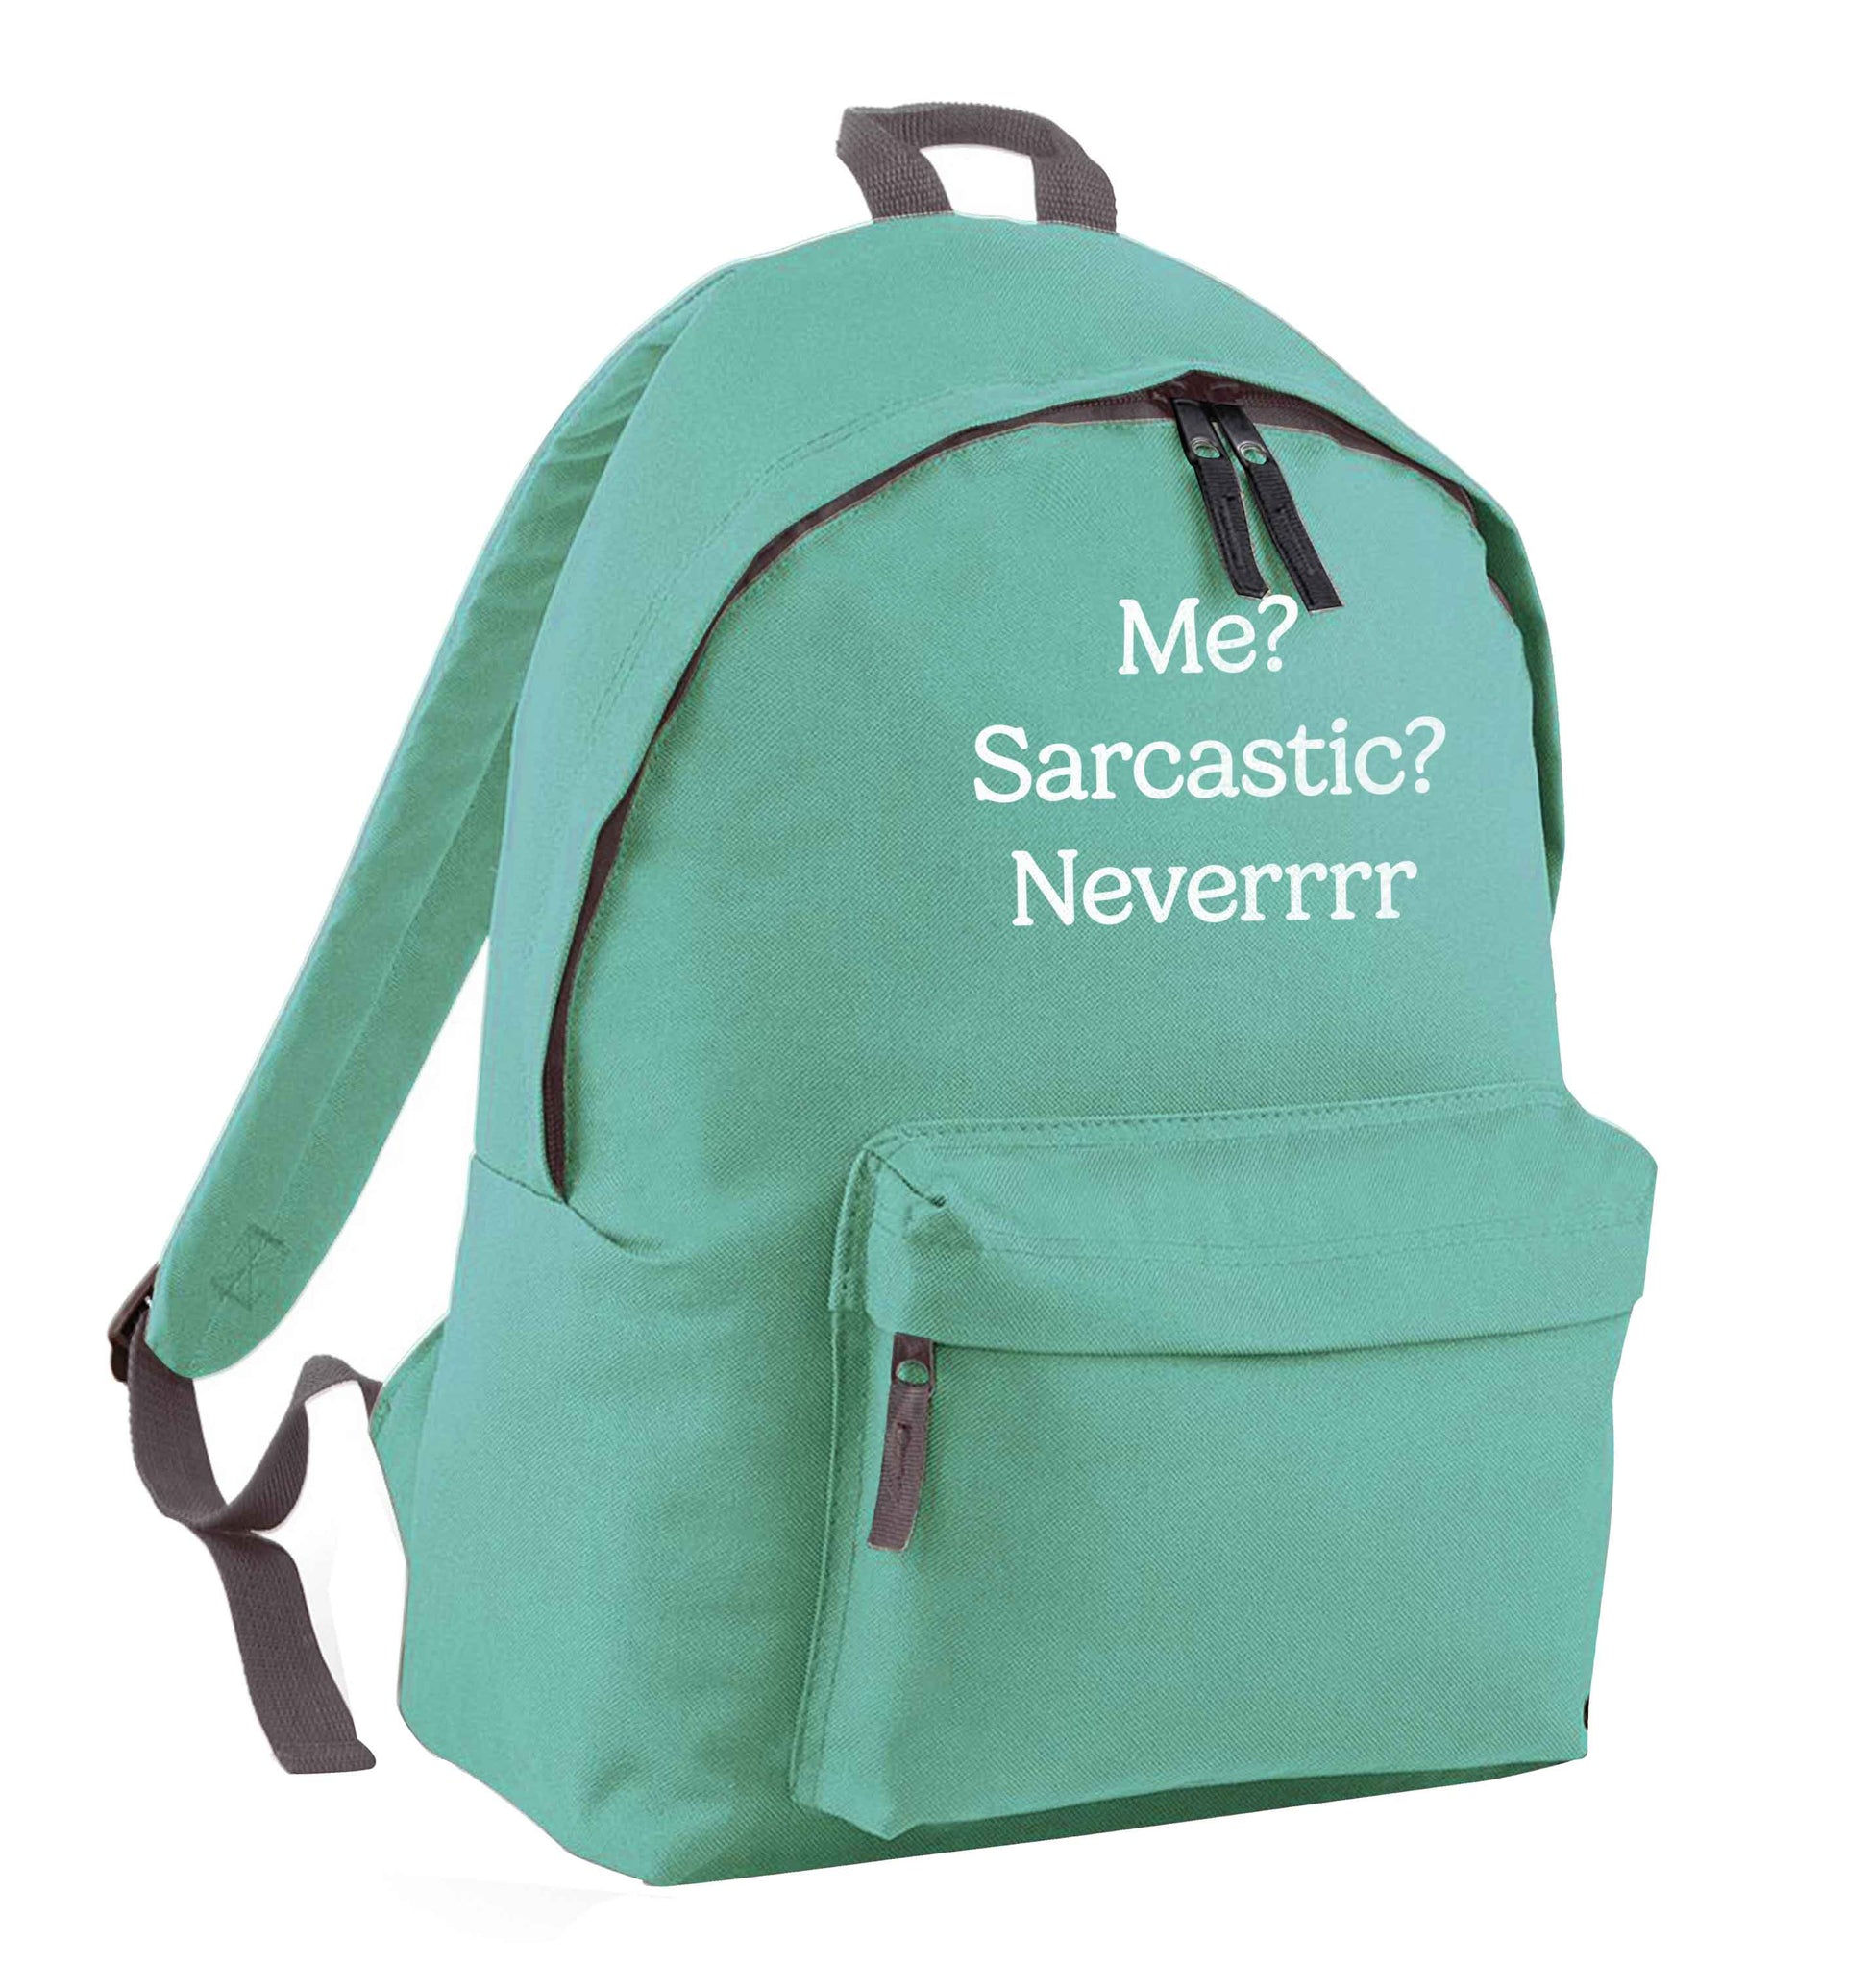 Me? sarcastic? never mint adults backpack